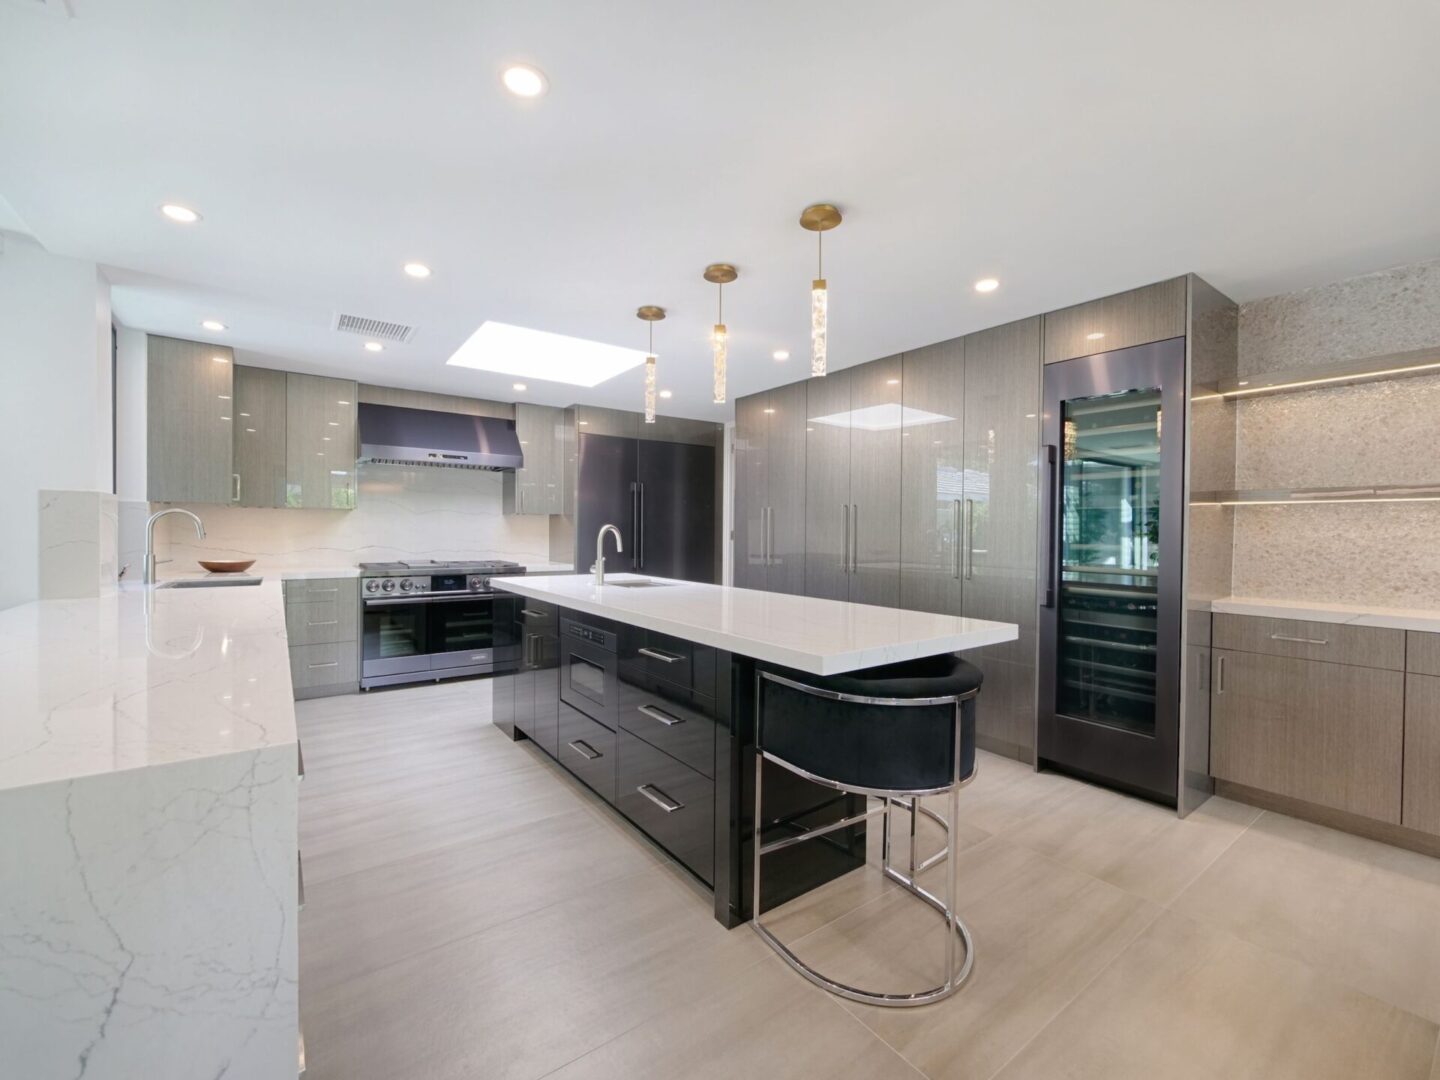 A kitchen with stainless steel cabinets and white counters.